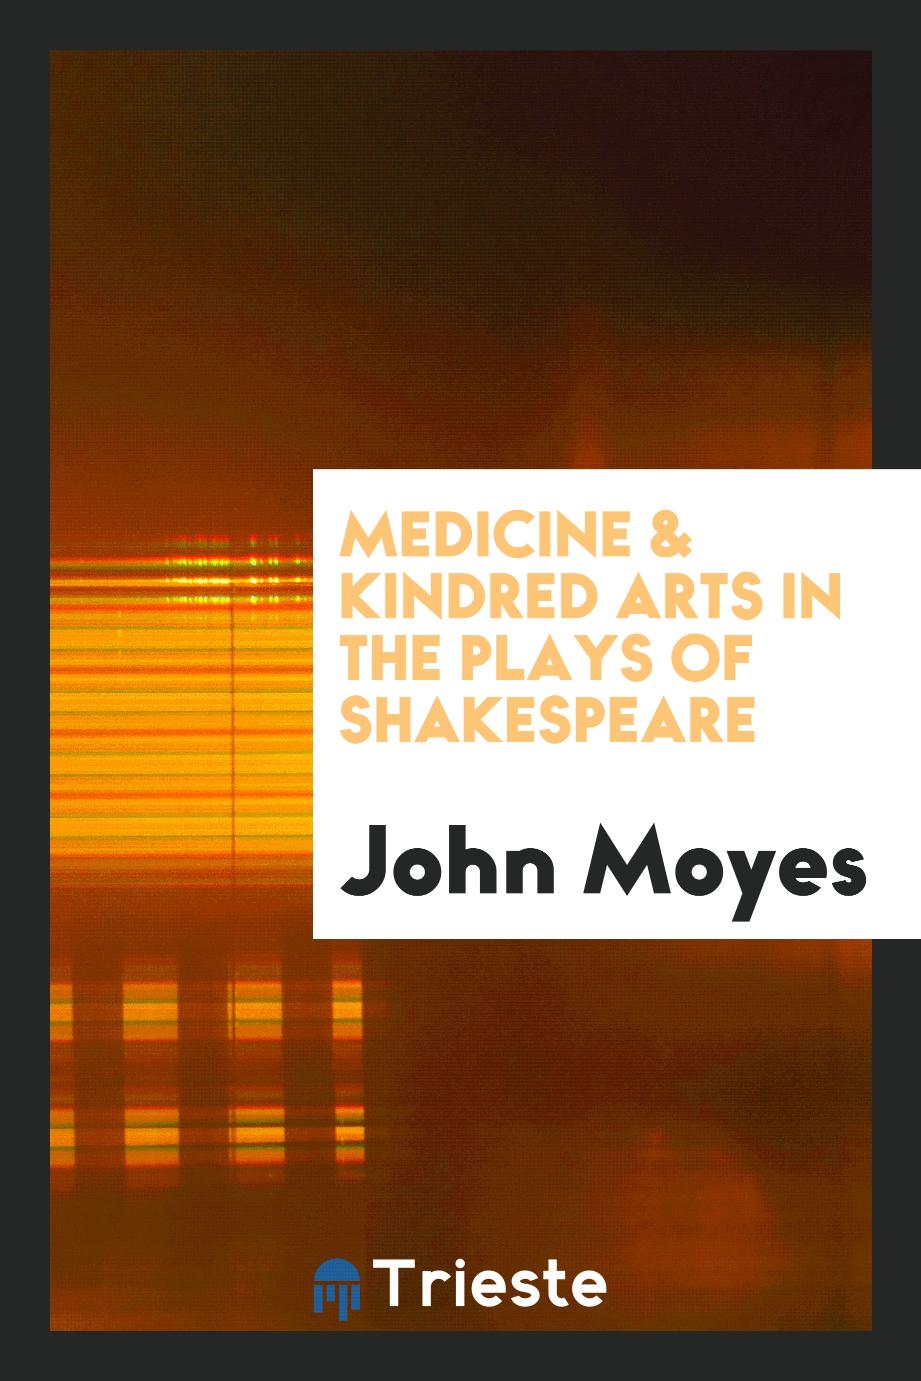 Medicine & Kindred Arts in the Plays of Shakespeare